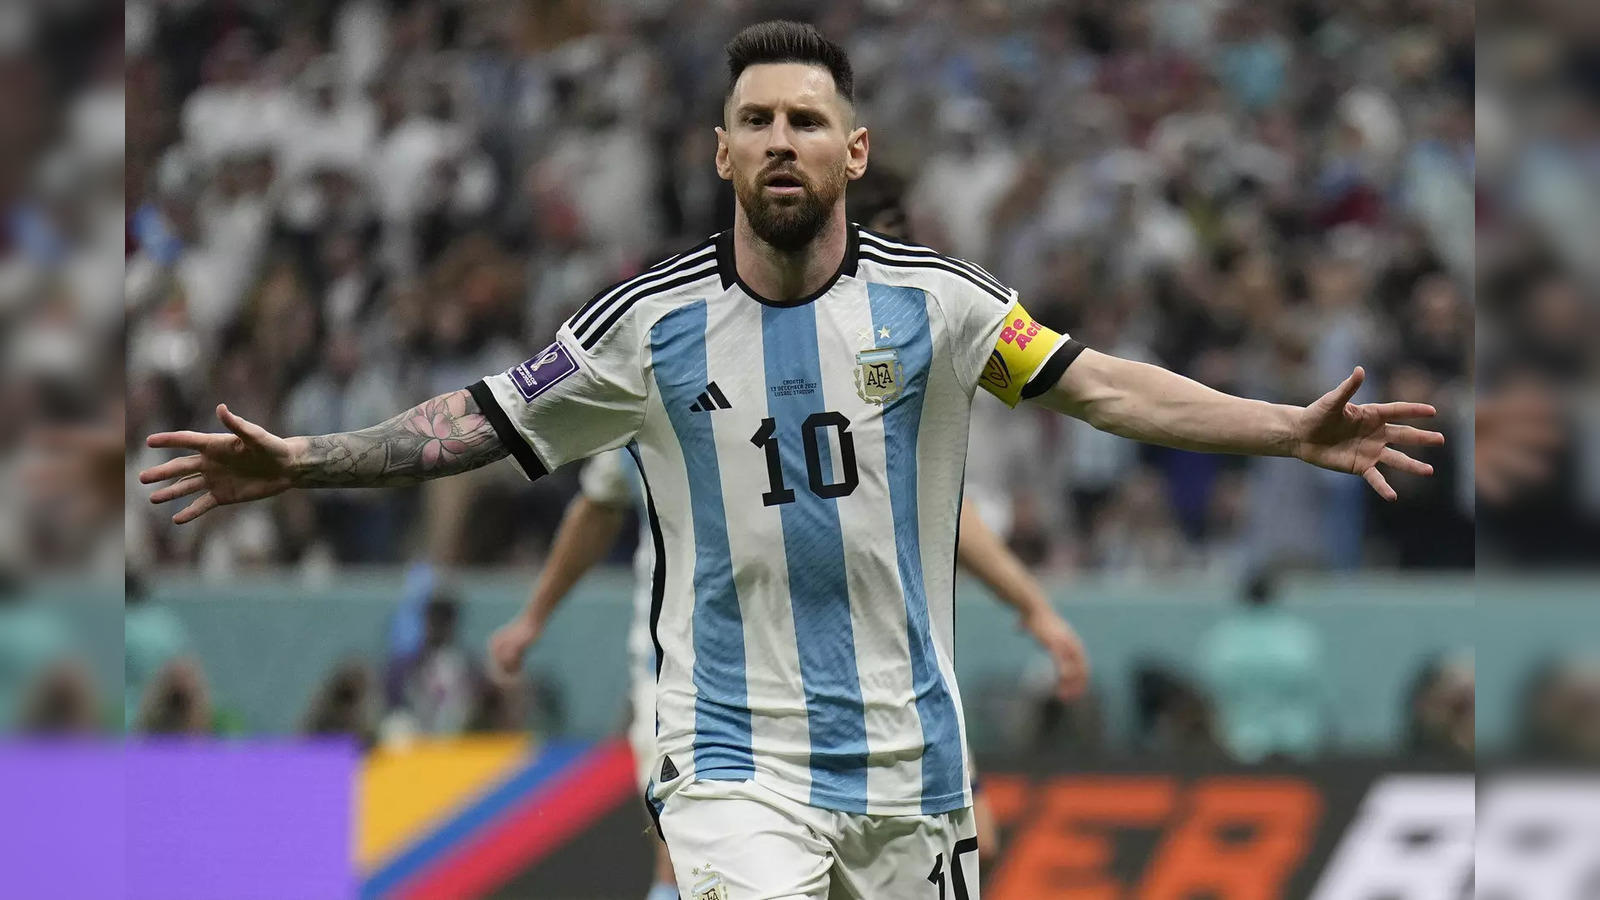 World Cup prize money 2022: How much will Argentina earn? Purse, breakdown  for teams and players in Qatar